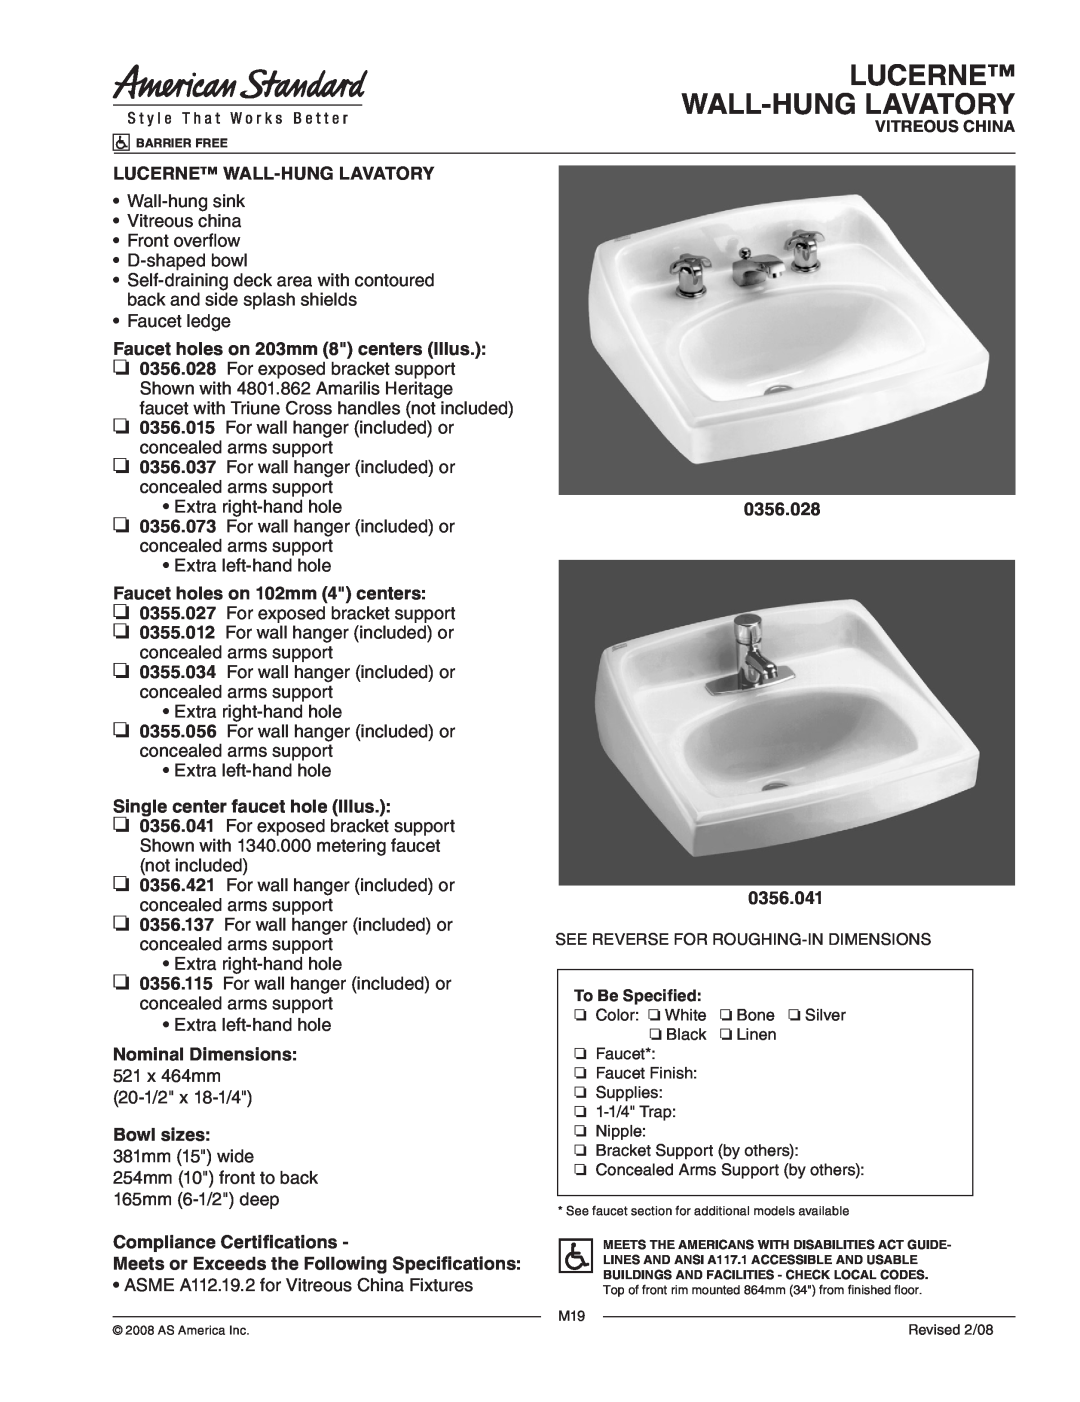 American Standard 0356.073 dimensions Lucerne Wall-Hunglavatory, Faucet holes on 203mm 8 centers Illus, Nominal Dimensions 